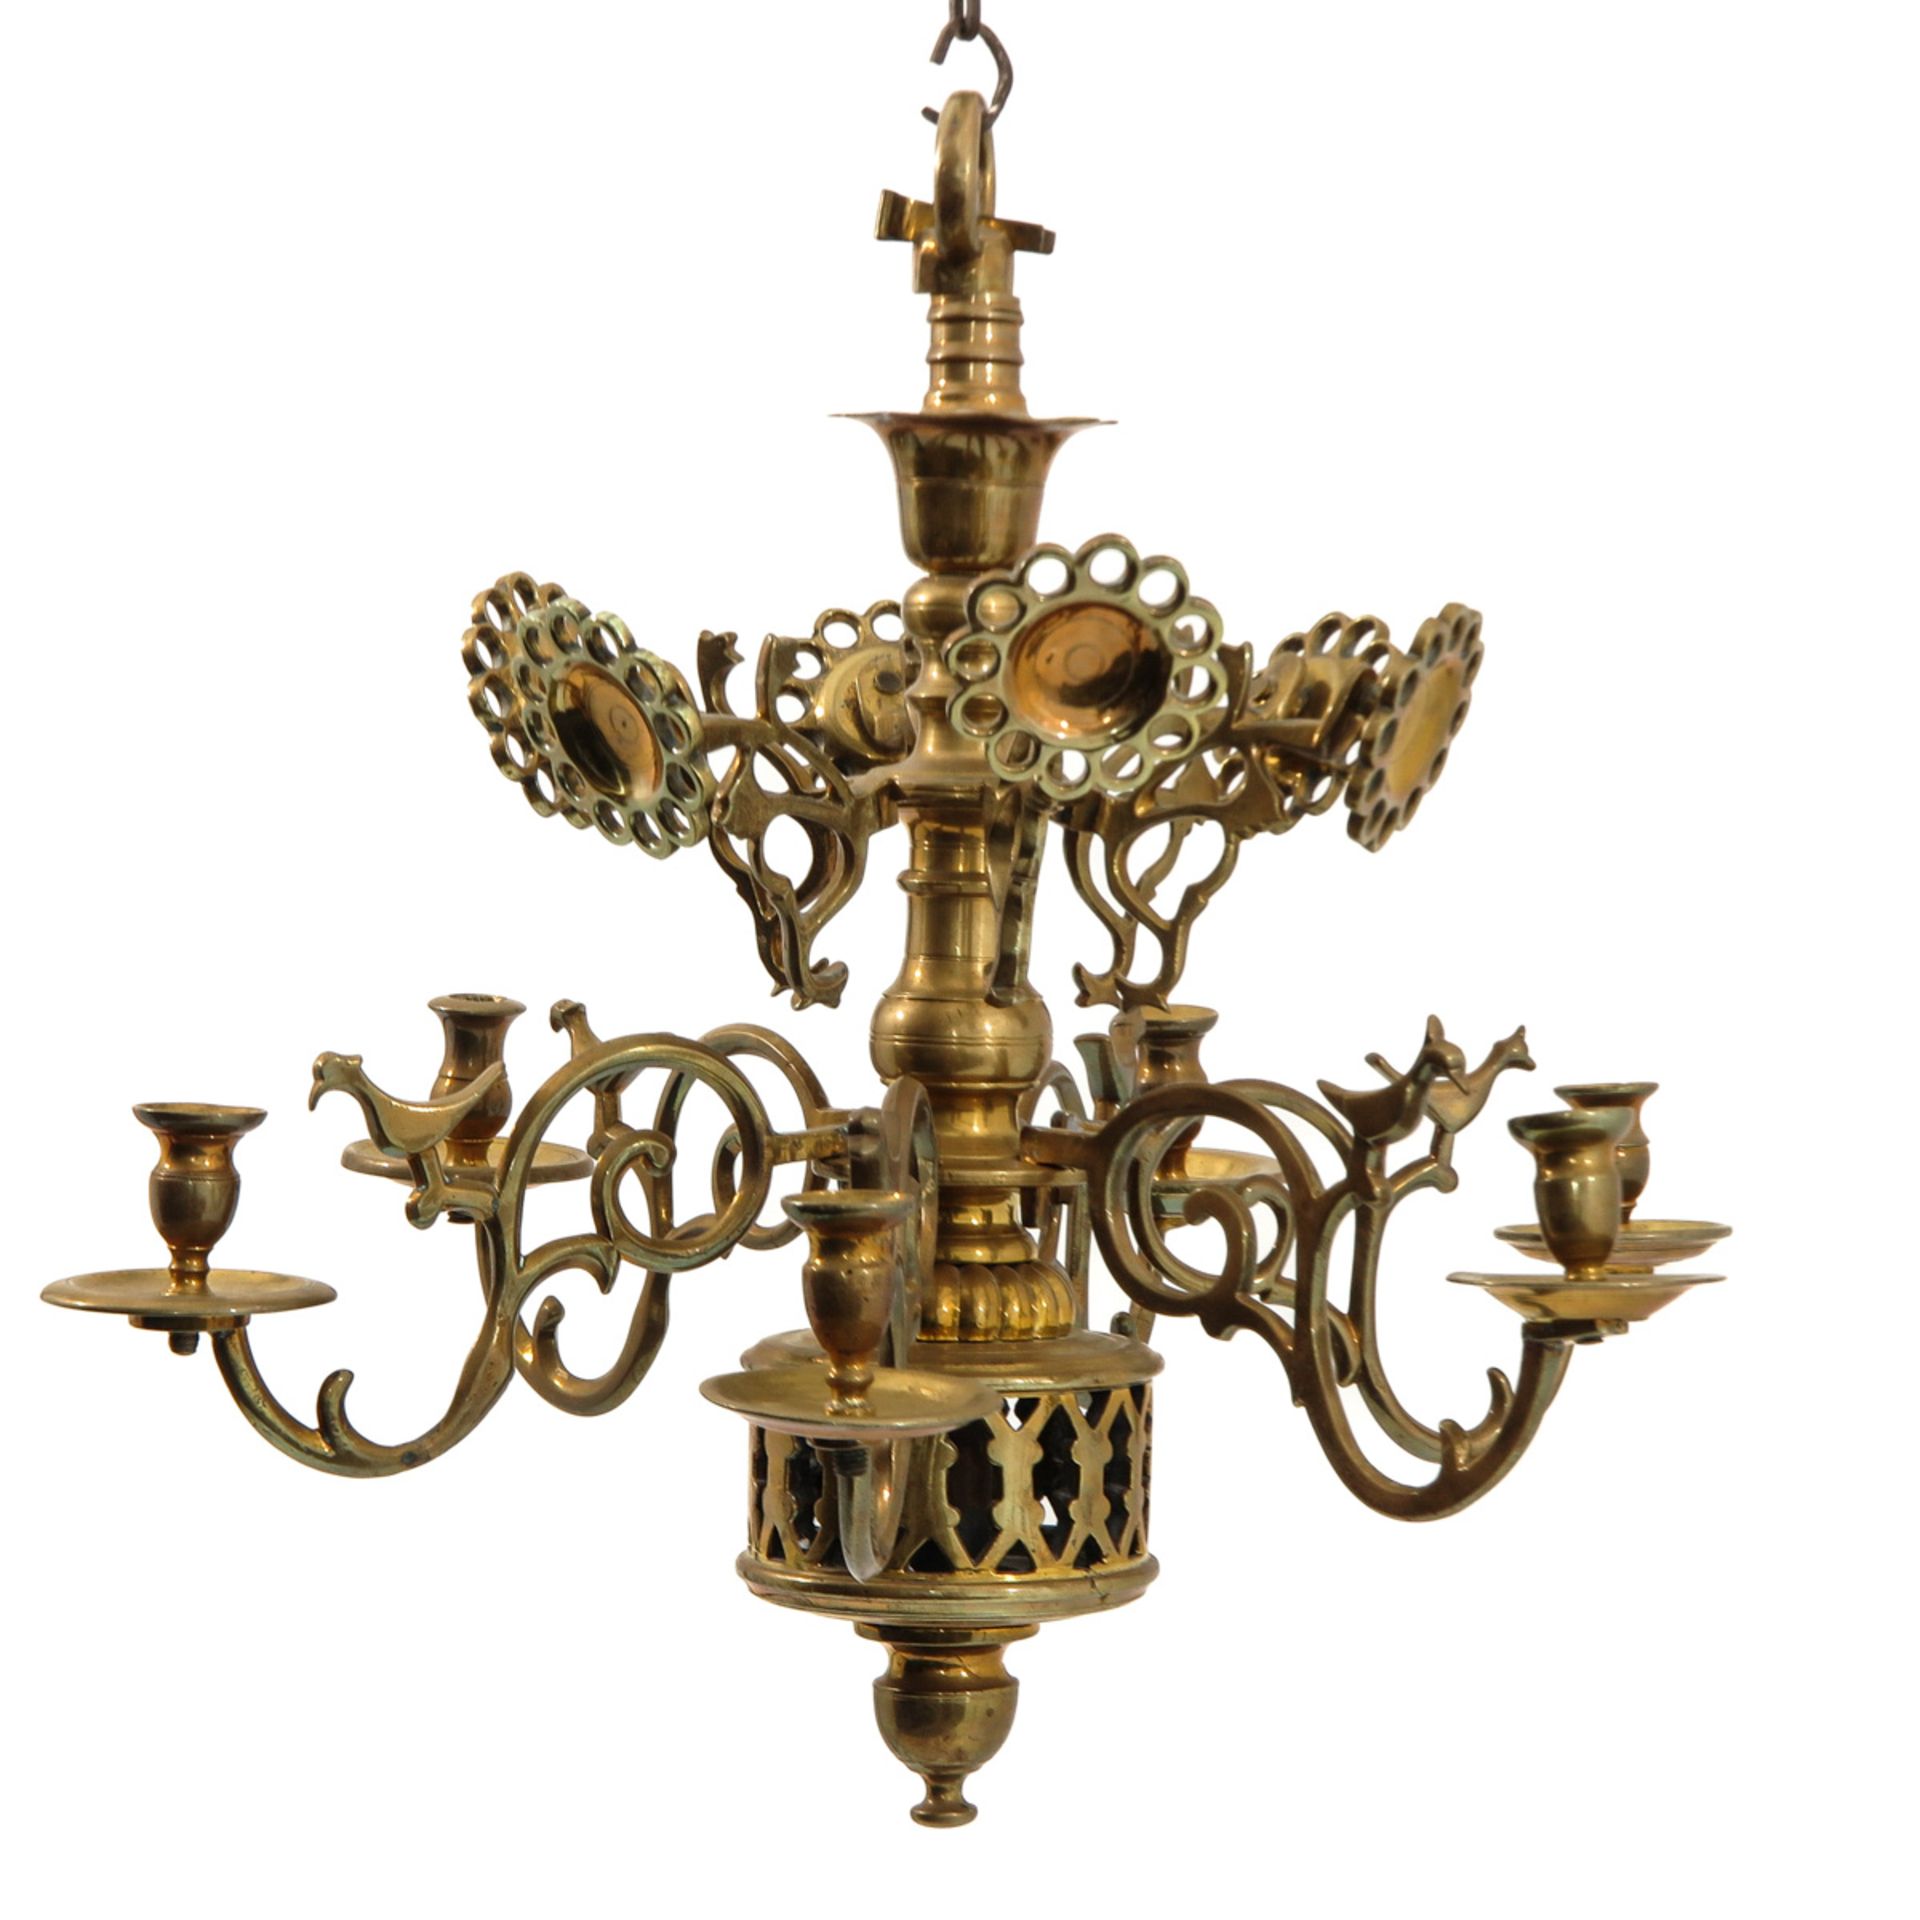 A Brass 18th Century Chandelier - Image 3 of 7